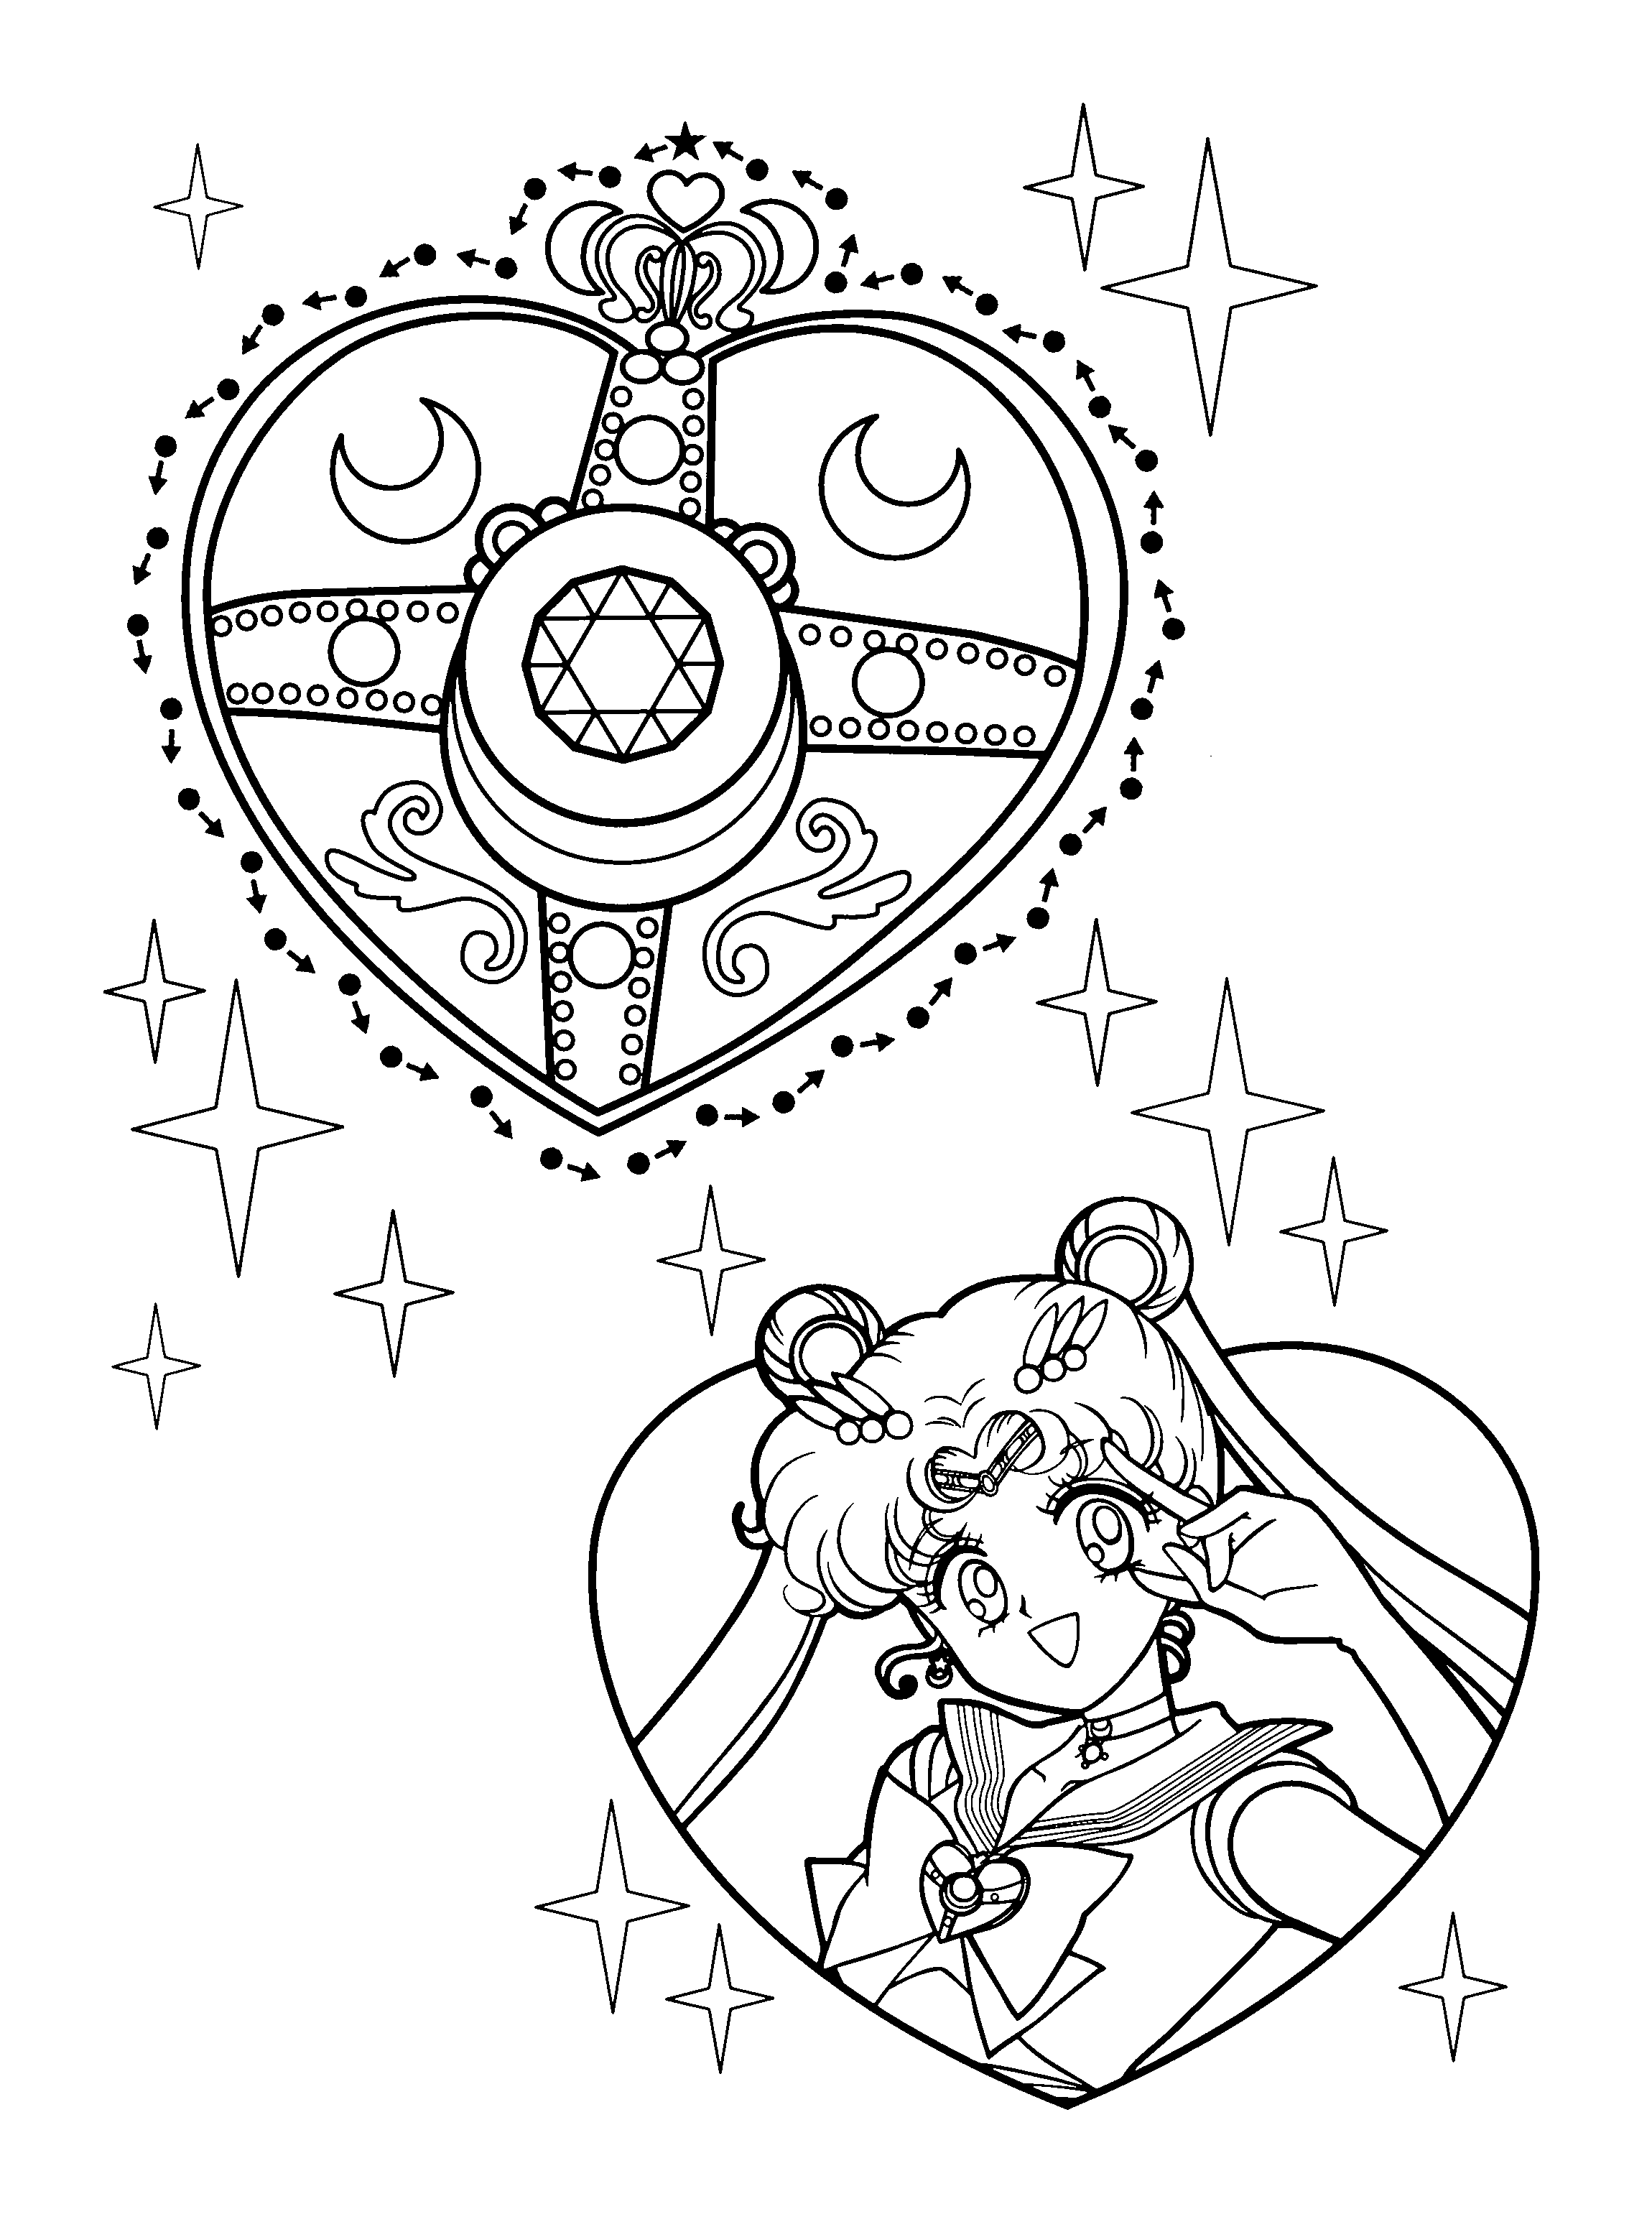 sailor moon coloring book pages - photo #31